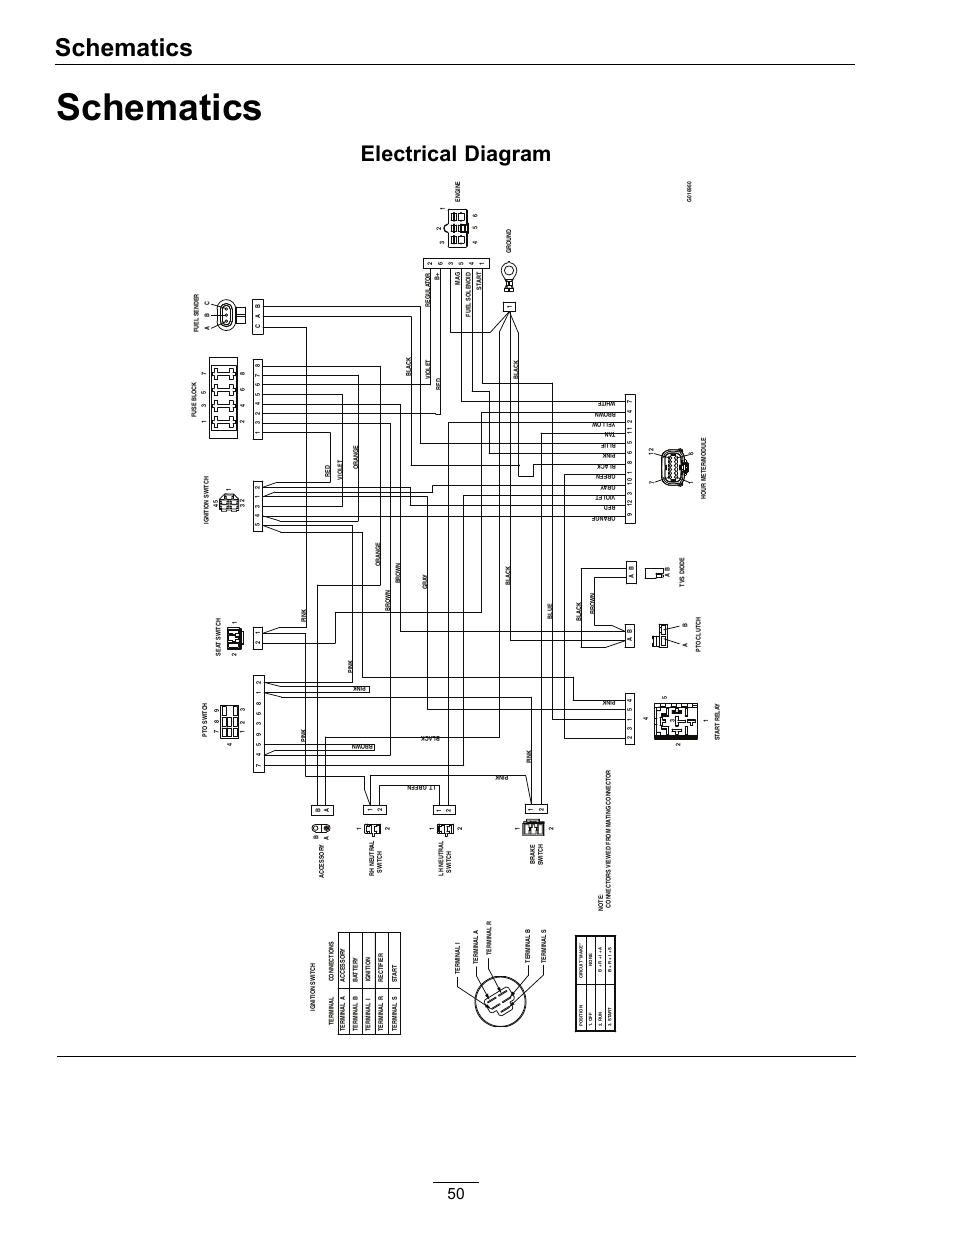 grote 9130 tail light wiring diagram